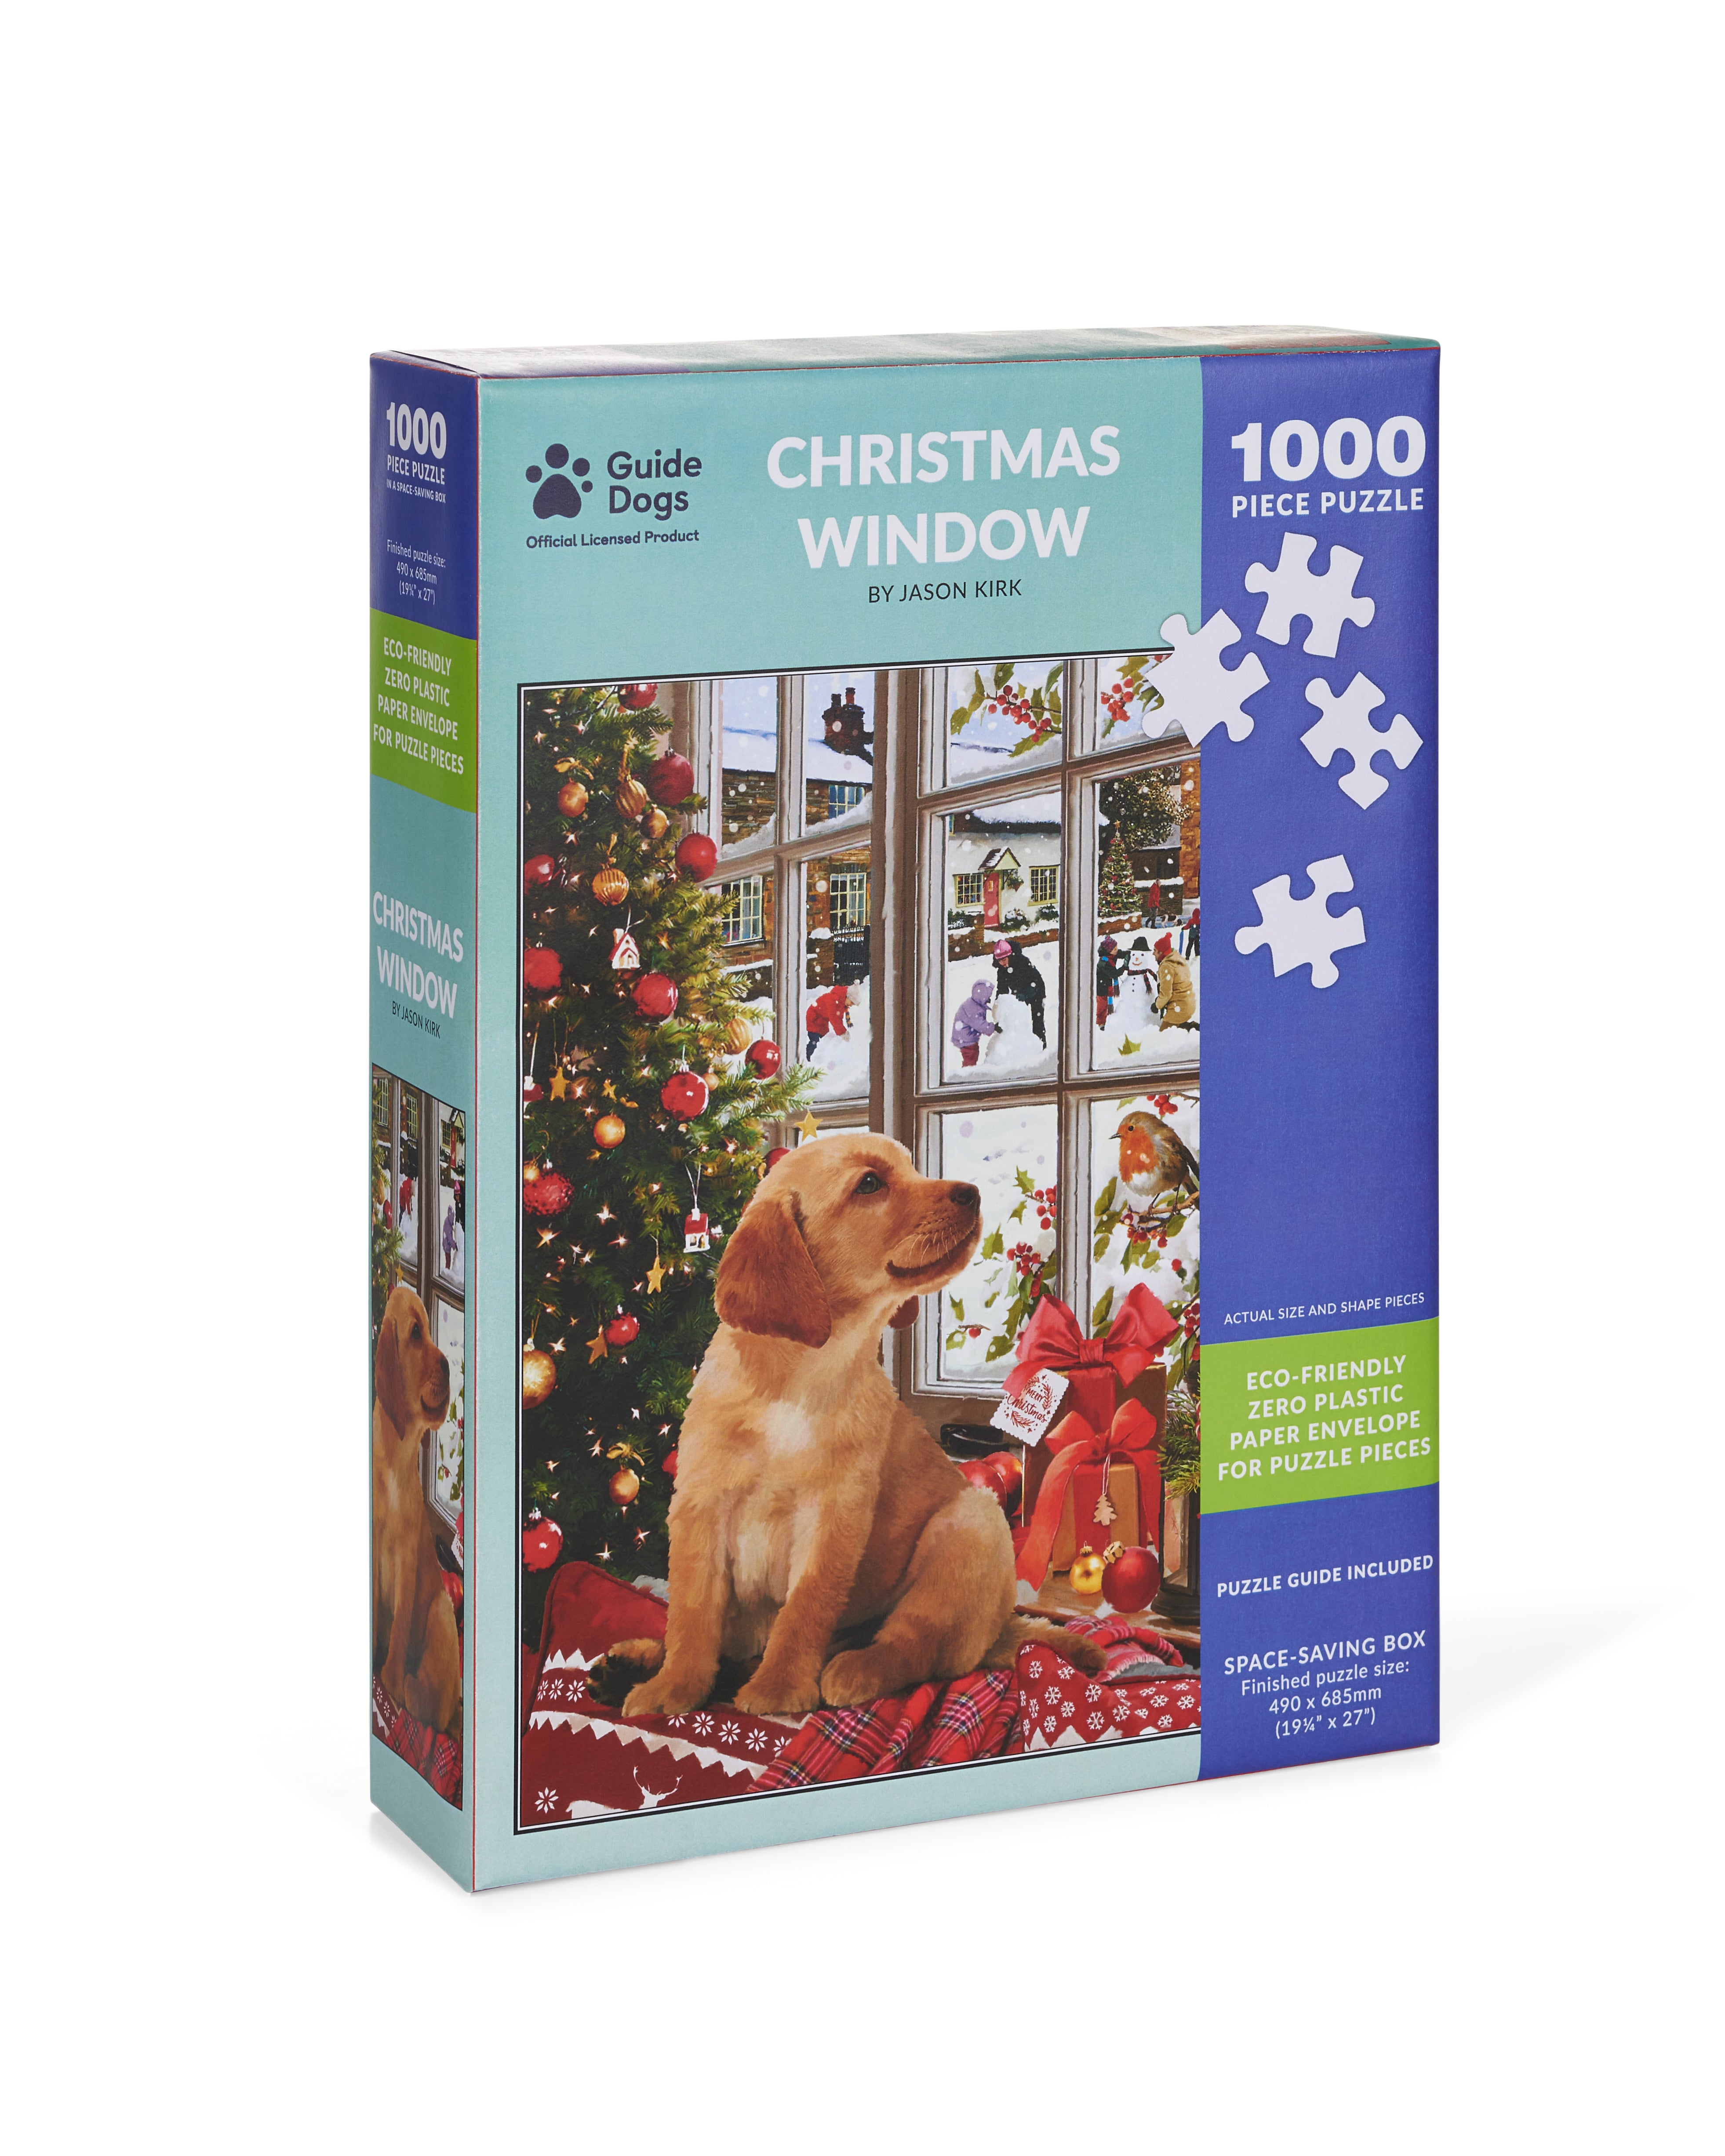 Guide Dogs  jigsaw box showing illustration of Labrador puppy looking out of a window onto a snowy scene